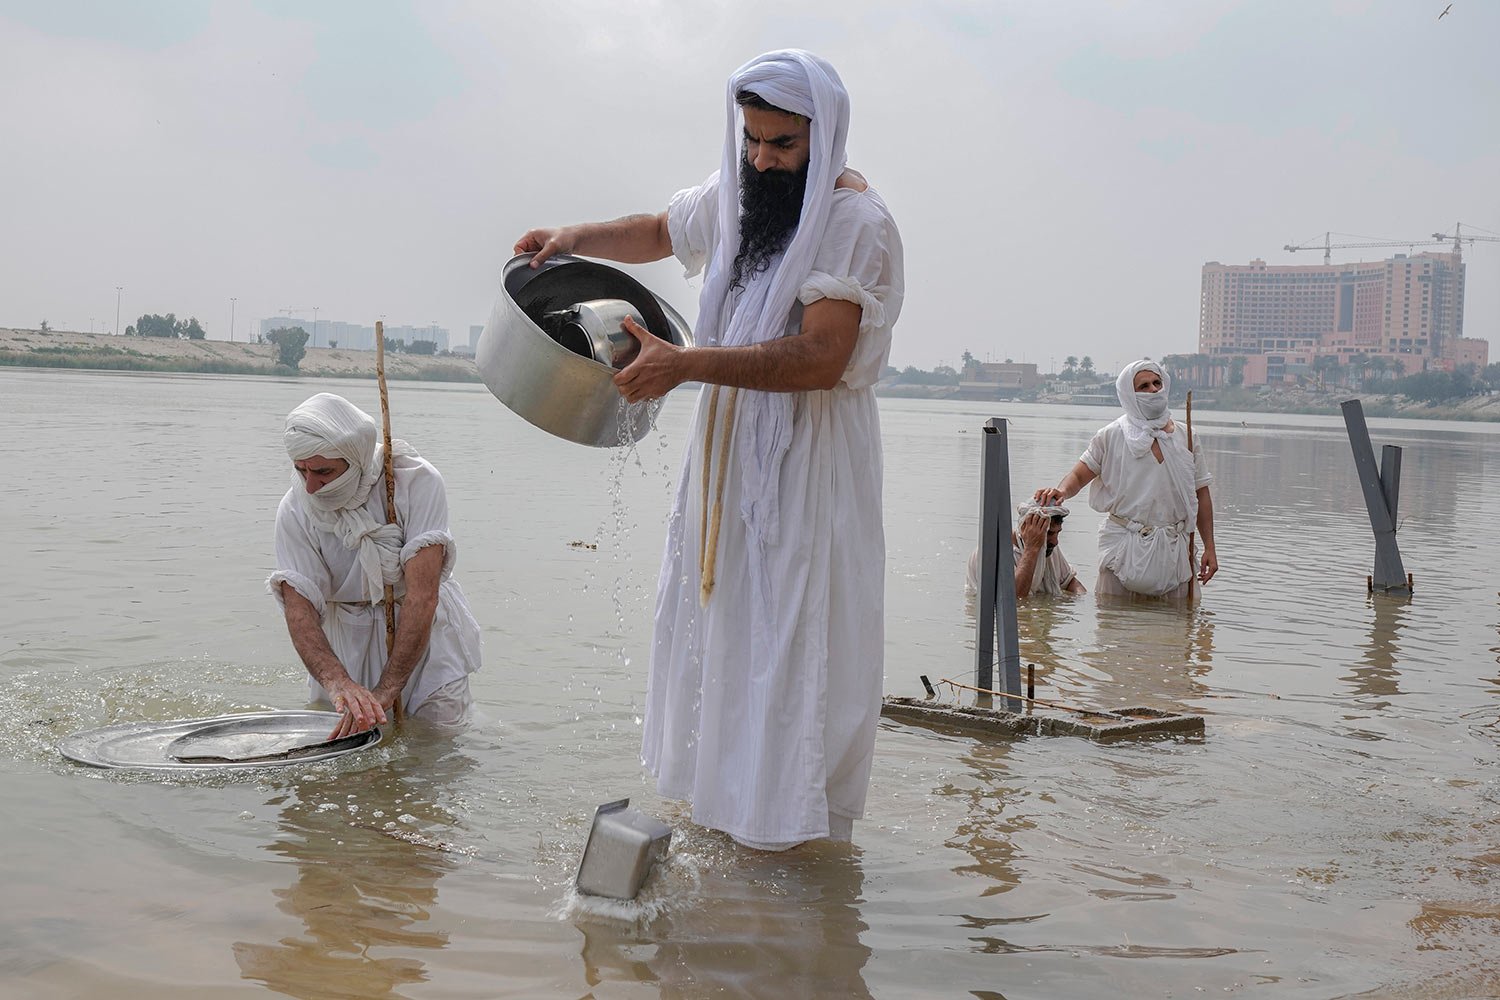  Followers of the Sabean Mandaeans faith, a pre-Christian sect that follows the teachings of the Bible's John the Baptist, perform their rituals in the Tigris River during a celebration marking "Banja" or Creation Feast, in central Baghdad, Iraq, Tue